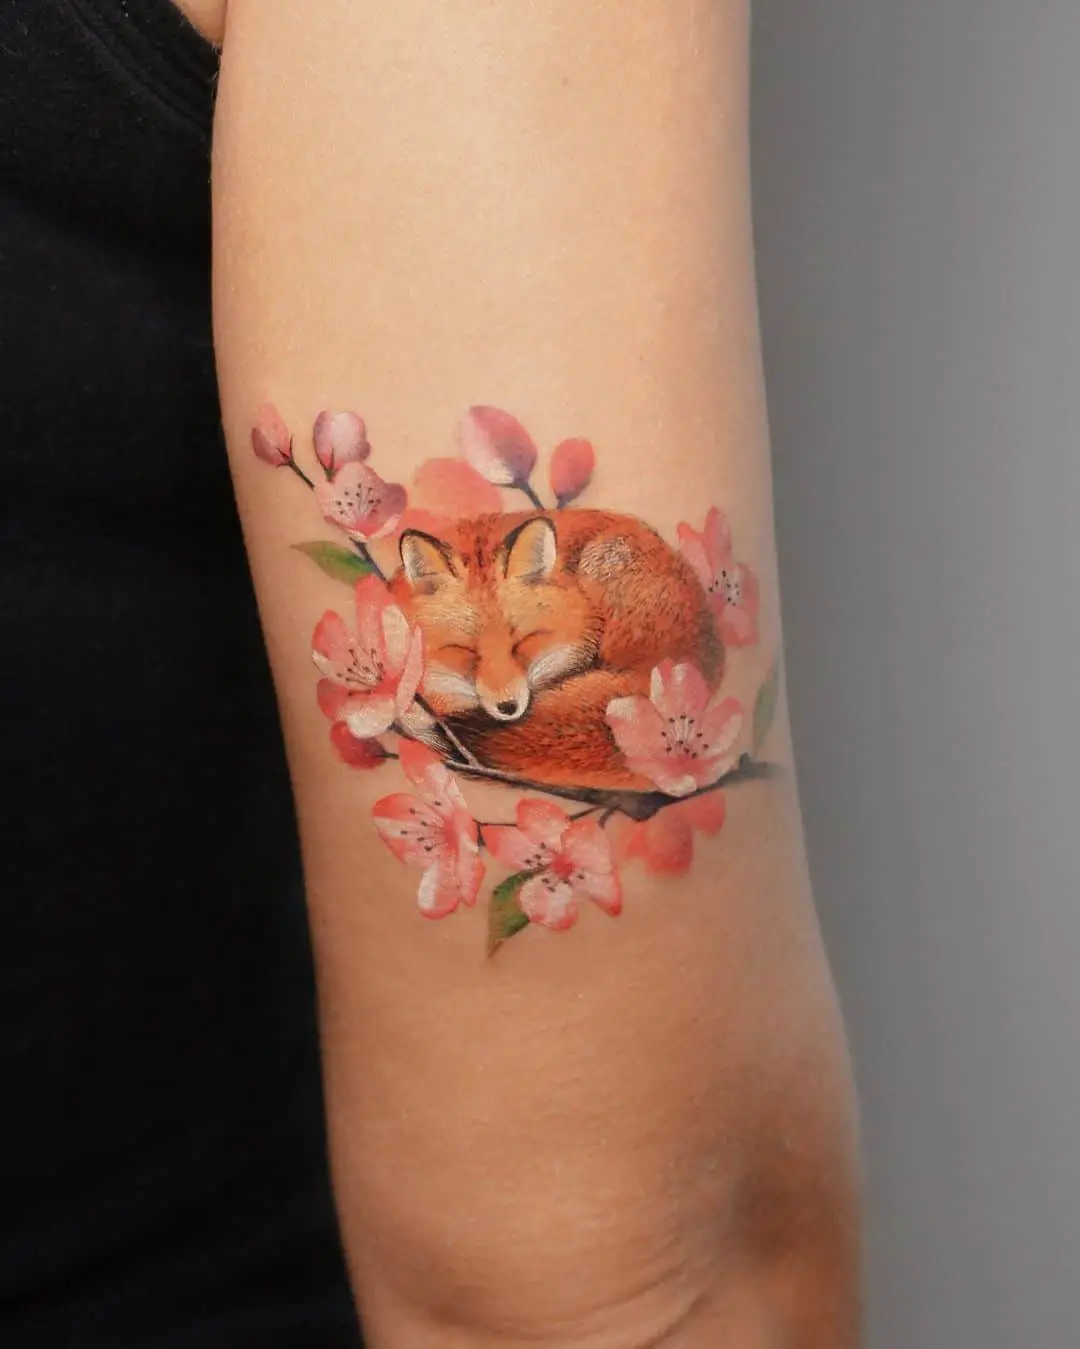 Abstruse Tattoo Studio - What do an Otter, Fox, butterfly, tree and river  have in common? Who knows, but it looks cool right? Another splendid banger  by our prodigal daughter Jacinda Rose